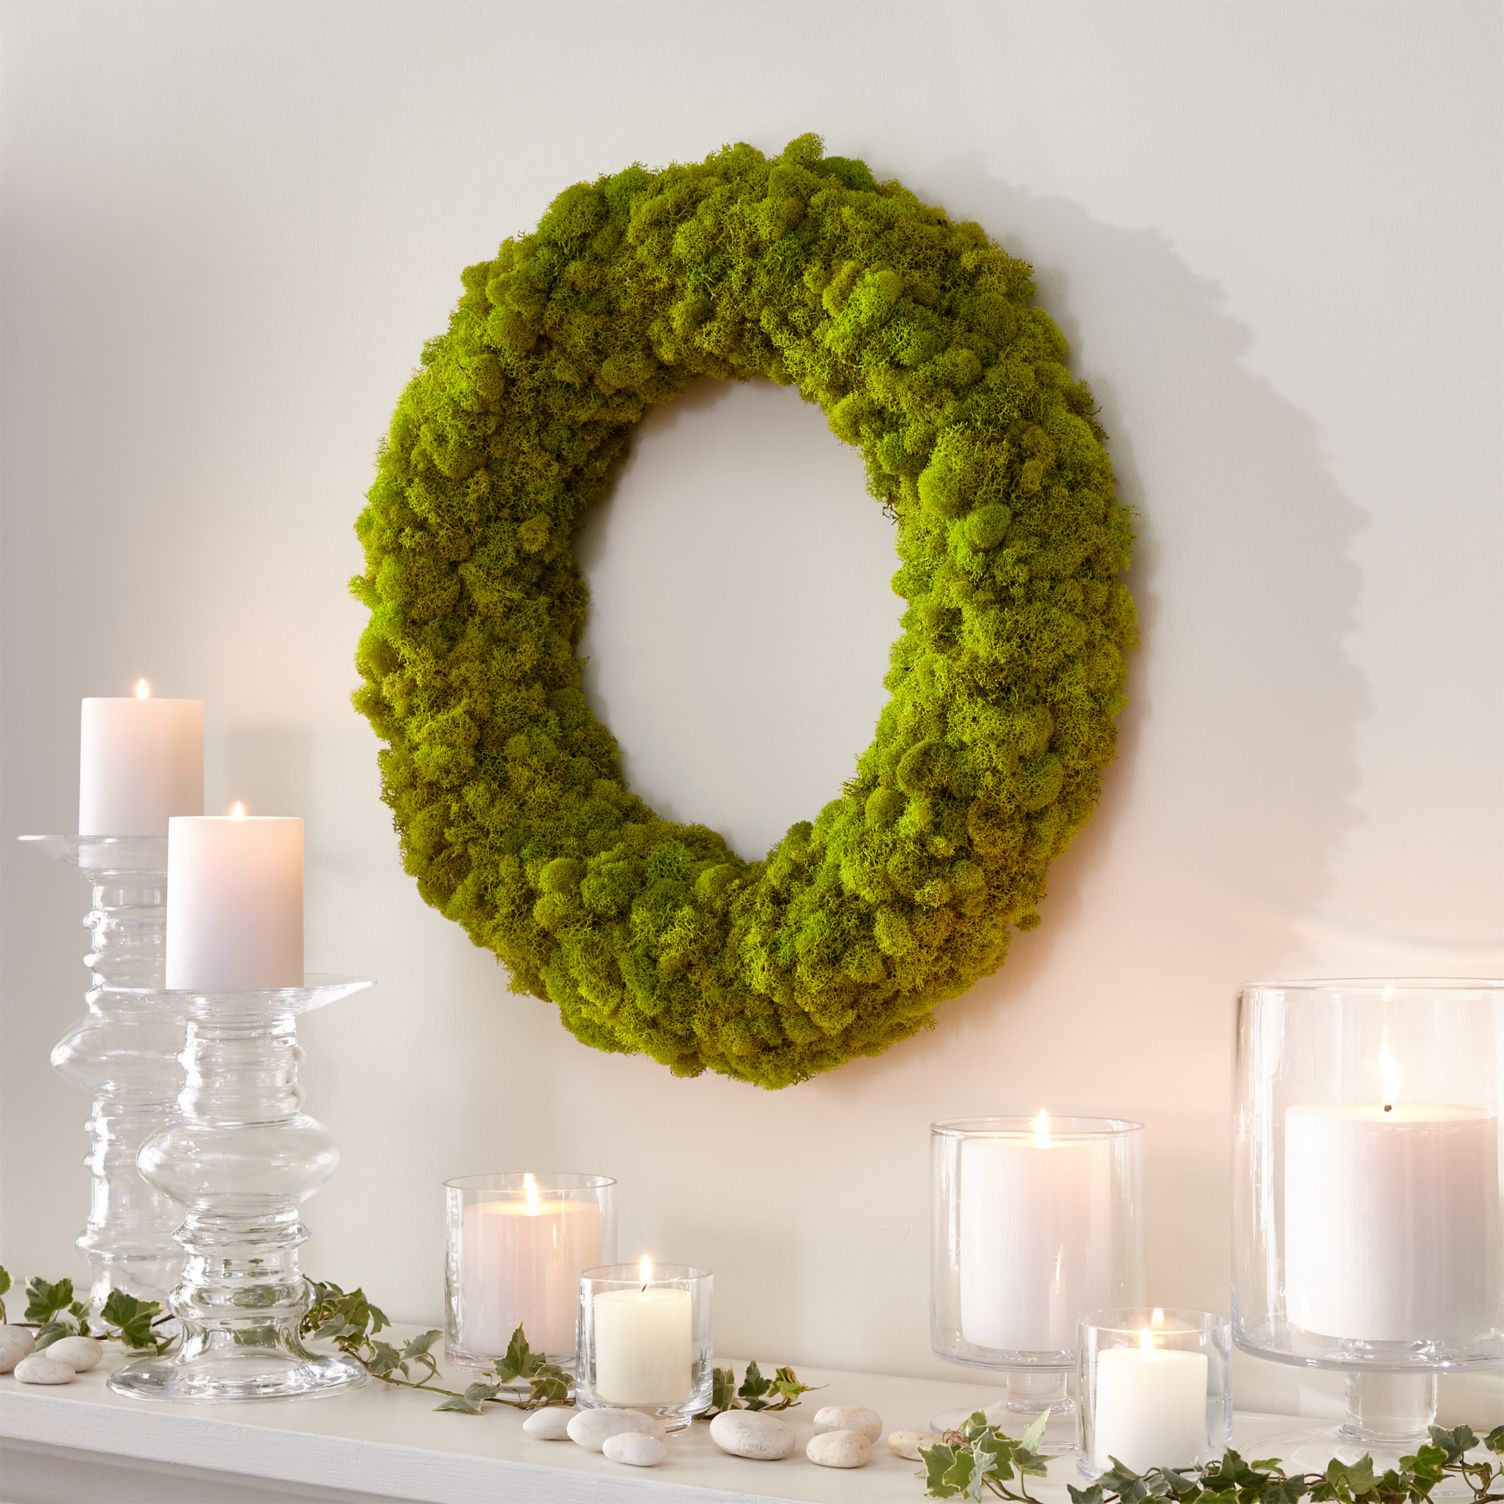 Moss wreath from Crate & Barrel